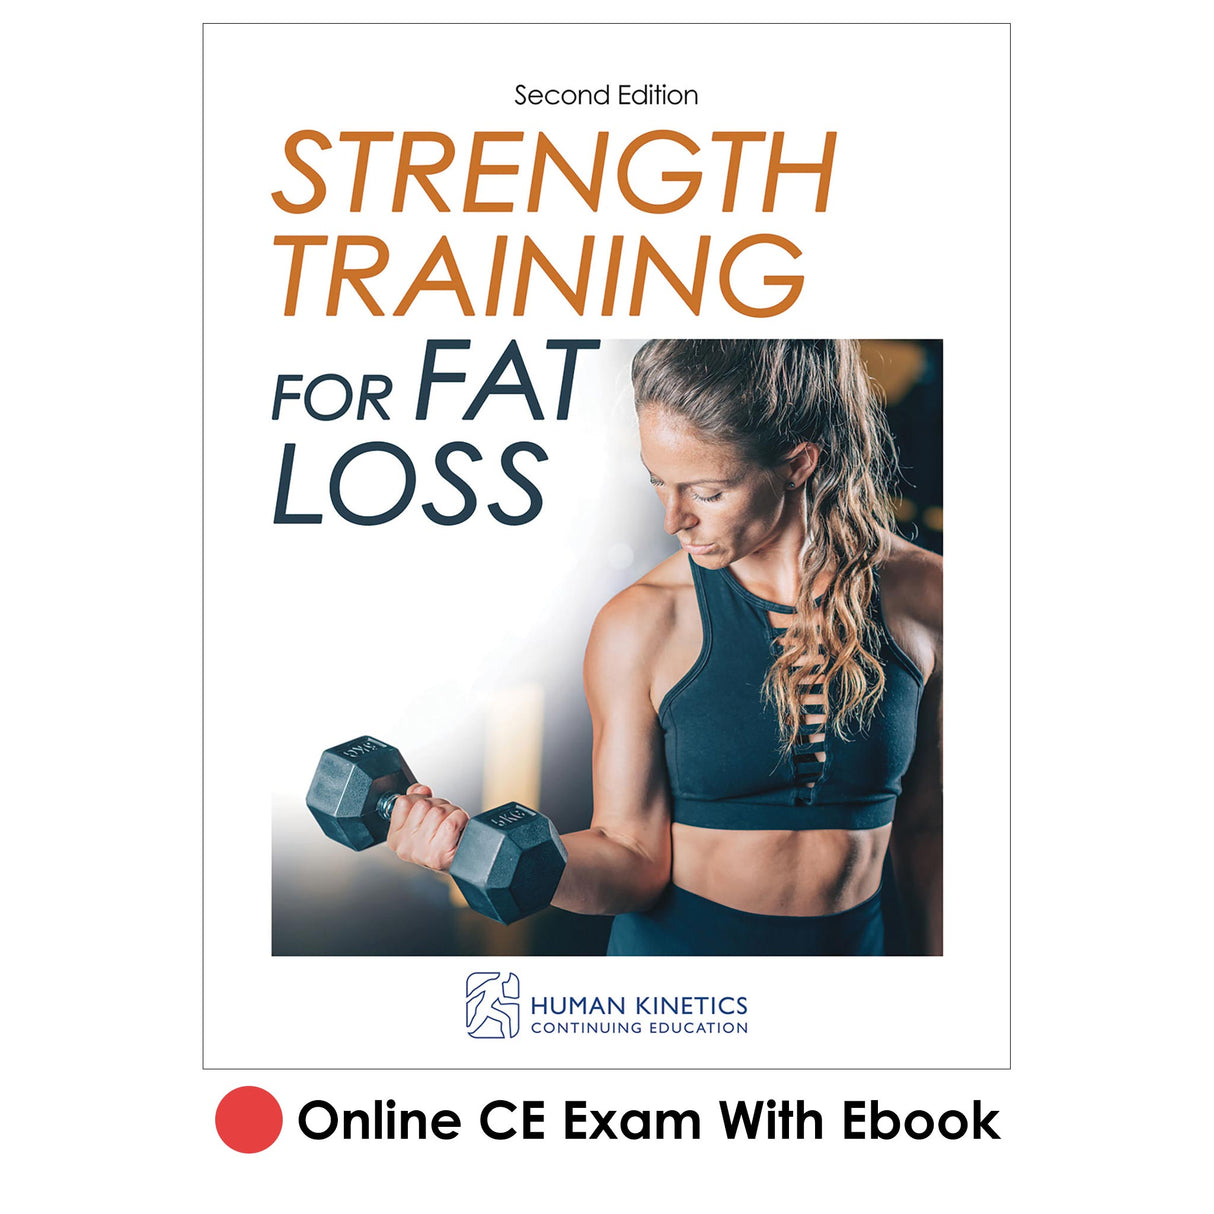 Strength Training for Fat Loss 2nd Edition Online CE Exam With Ebook